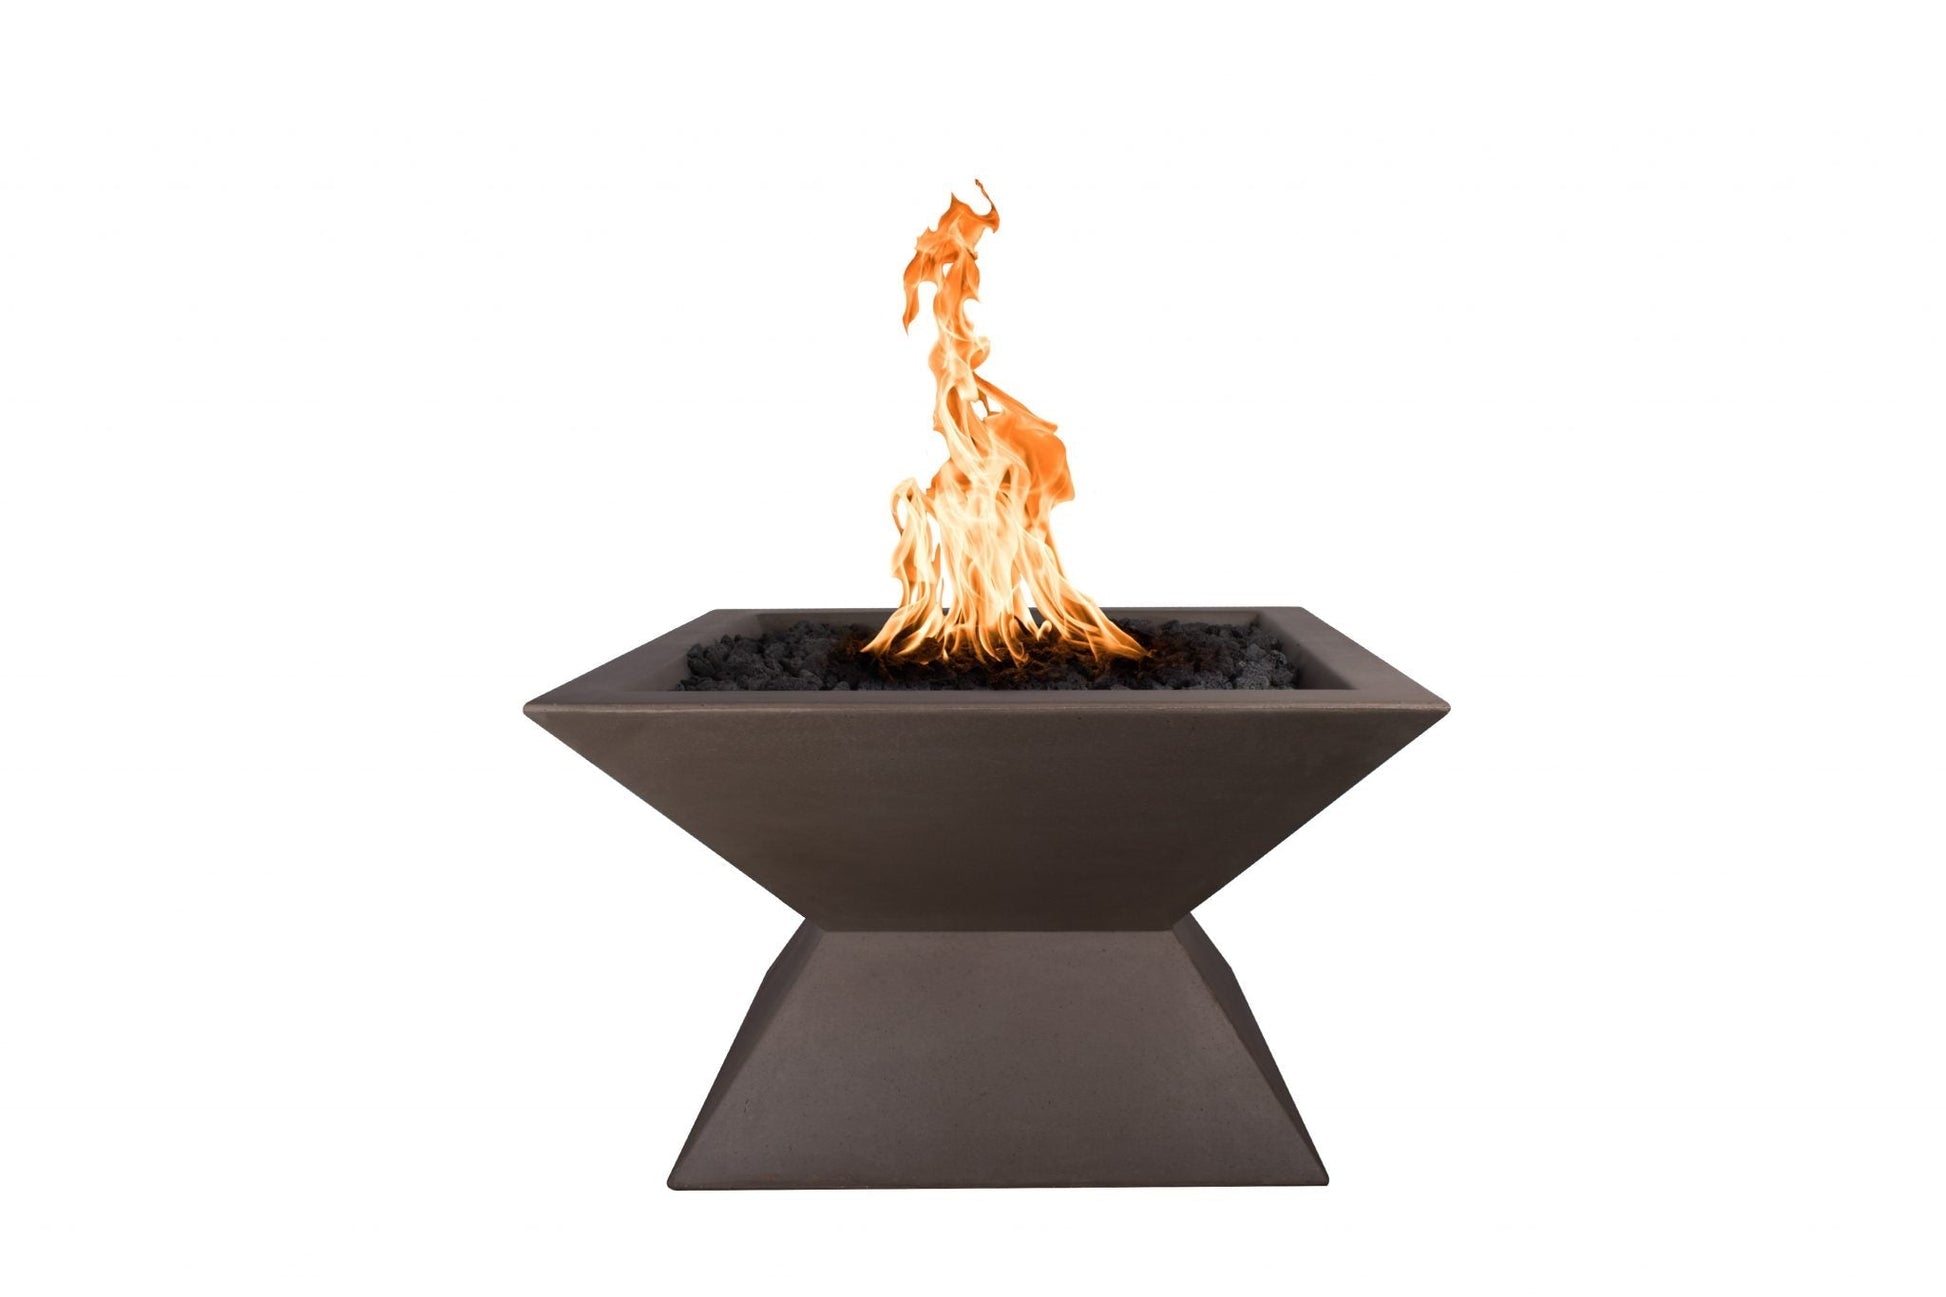 The Outdoor Plus Square Uxmal 30" Rustic Coffee GFRC Concrete Liquid Propane Fire Pit with Match Lit with Flame Sense Ignition